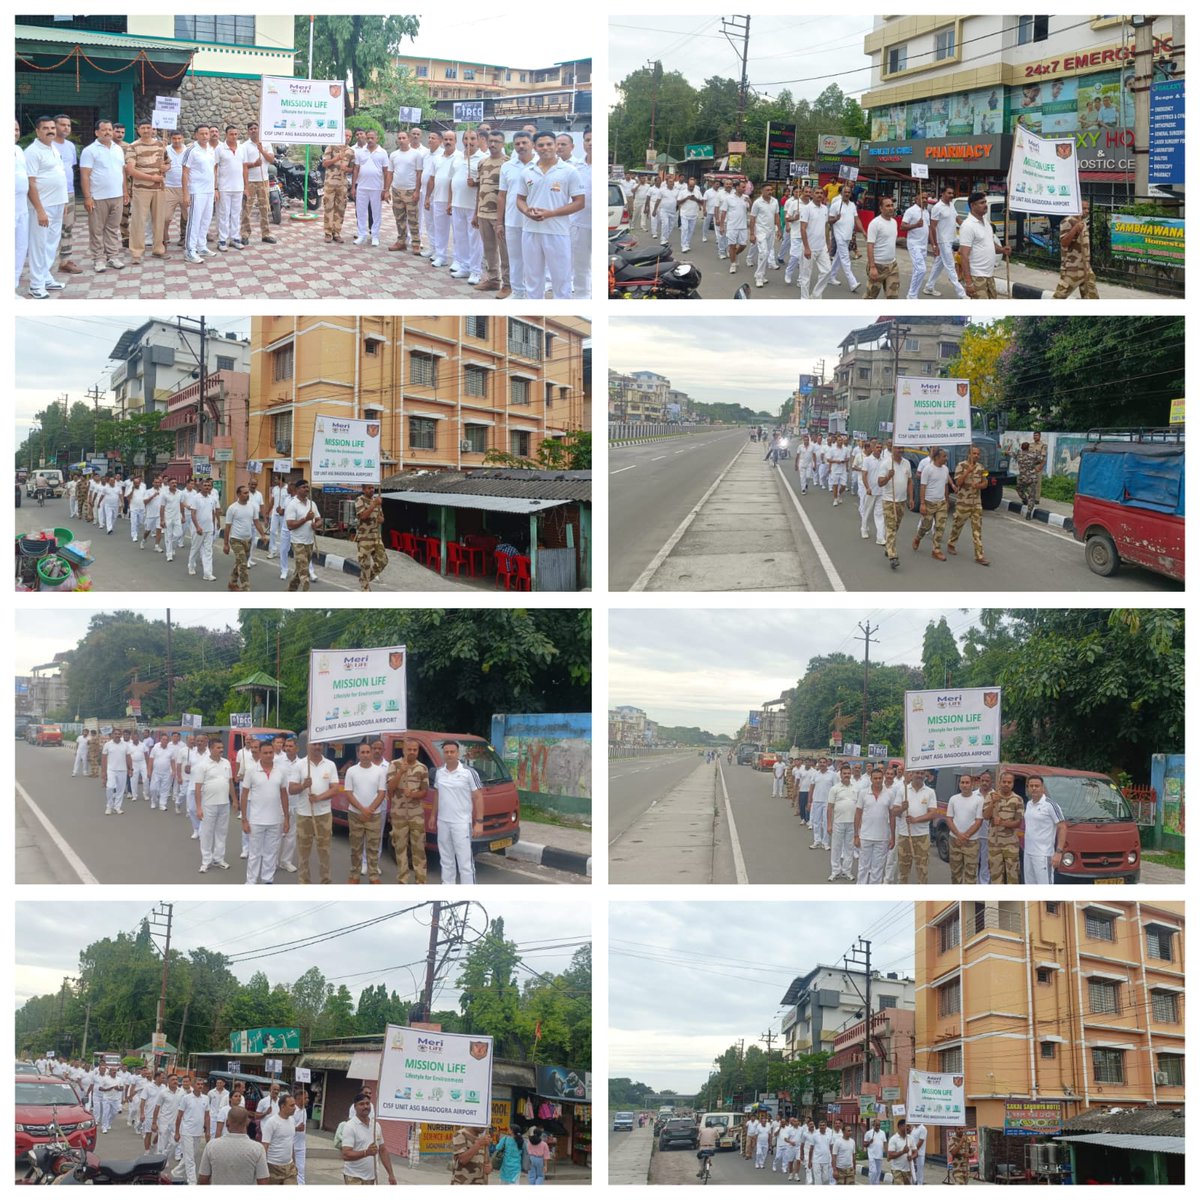 CISF personnel of ASG Bagdogra carried out a rally under #MissionLifestyleForEnvironment to spread awareness about the conservation of environment by saving electricity, water & trees.

#PROTECTIONandSECURITY #MeriLiFE
@HMOIndia
@moefcc